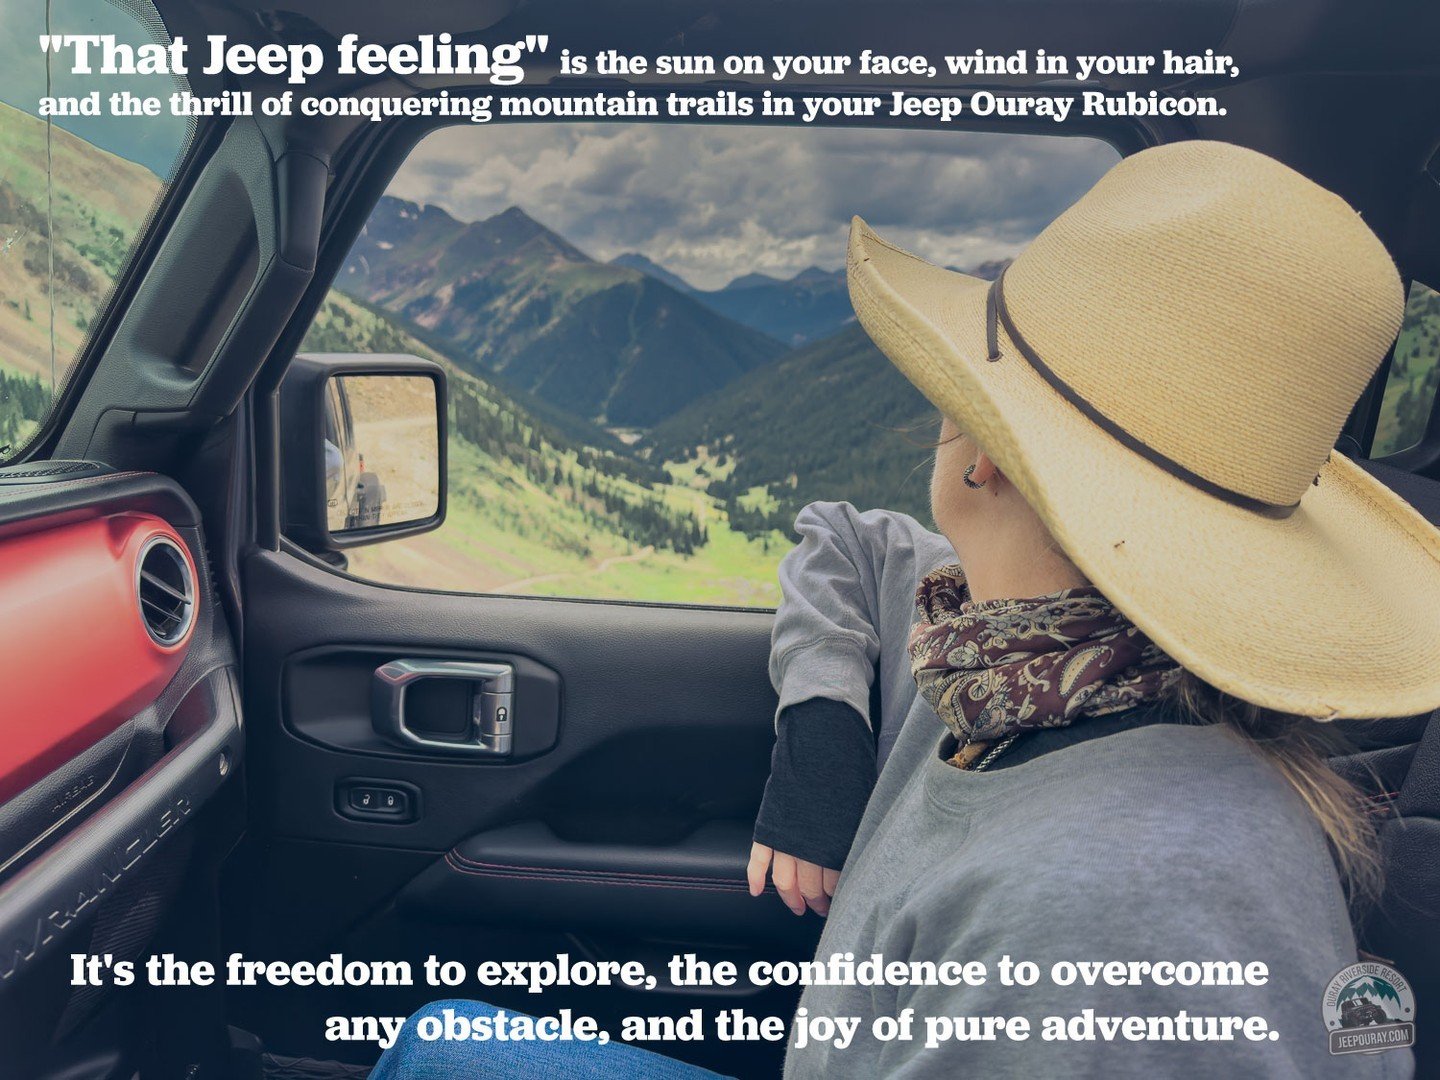 We LIVE for that Jeep Feeling...

https://www.ourayriversideresort.com/jeepouray

#jeeplife #ouray #ouraycolorado